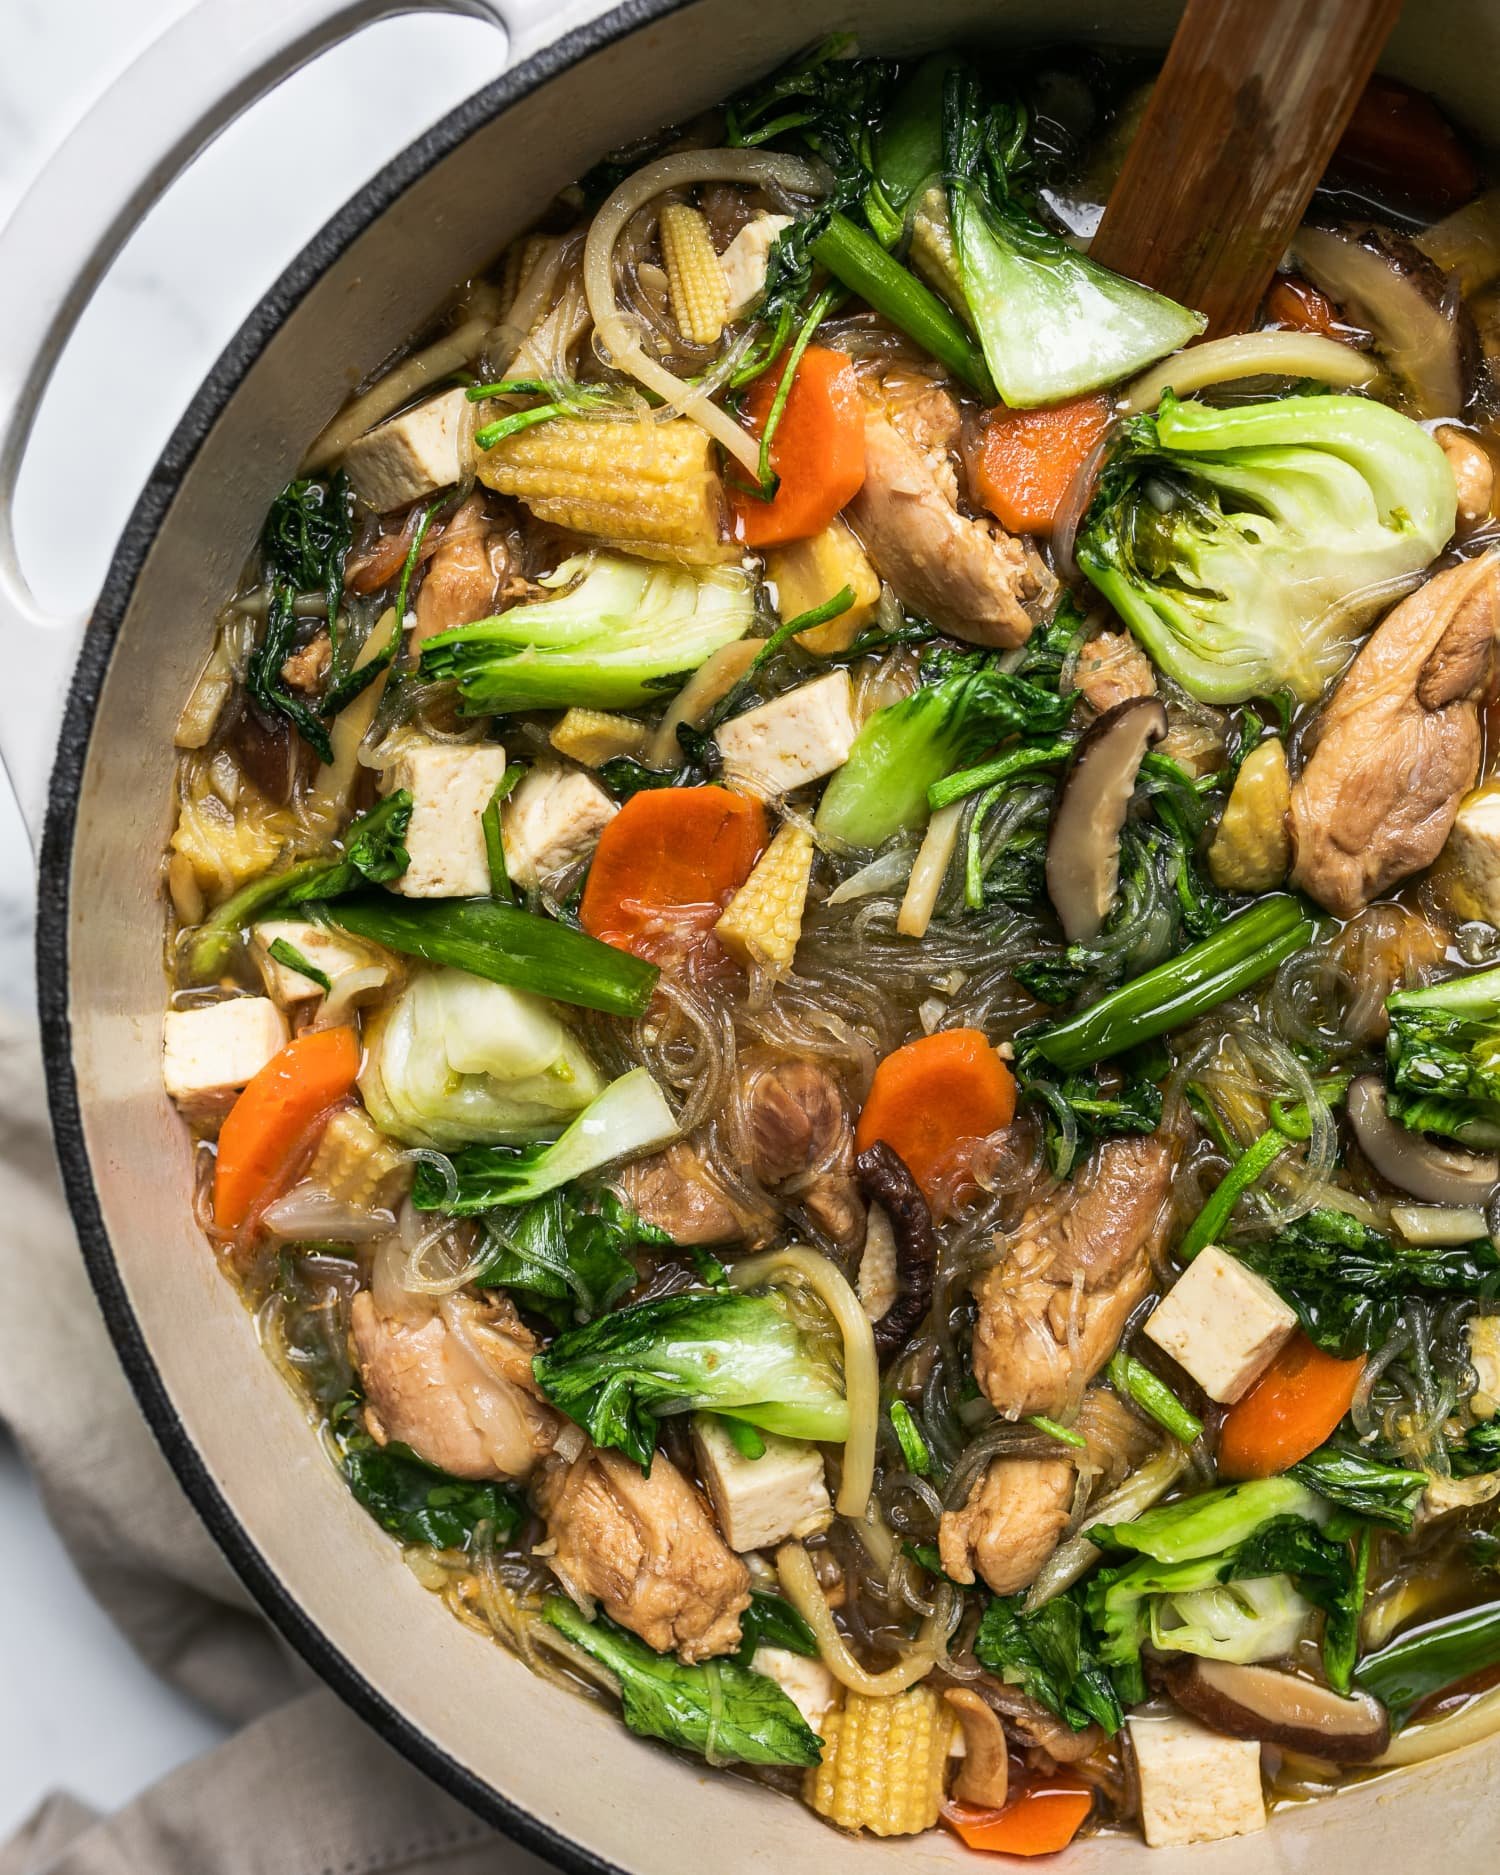 Sheldon Simeon’s One-Pot Chicken Hekka Is the Ultimate Clean-out-the-Fridge Meal